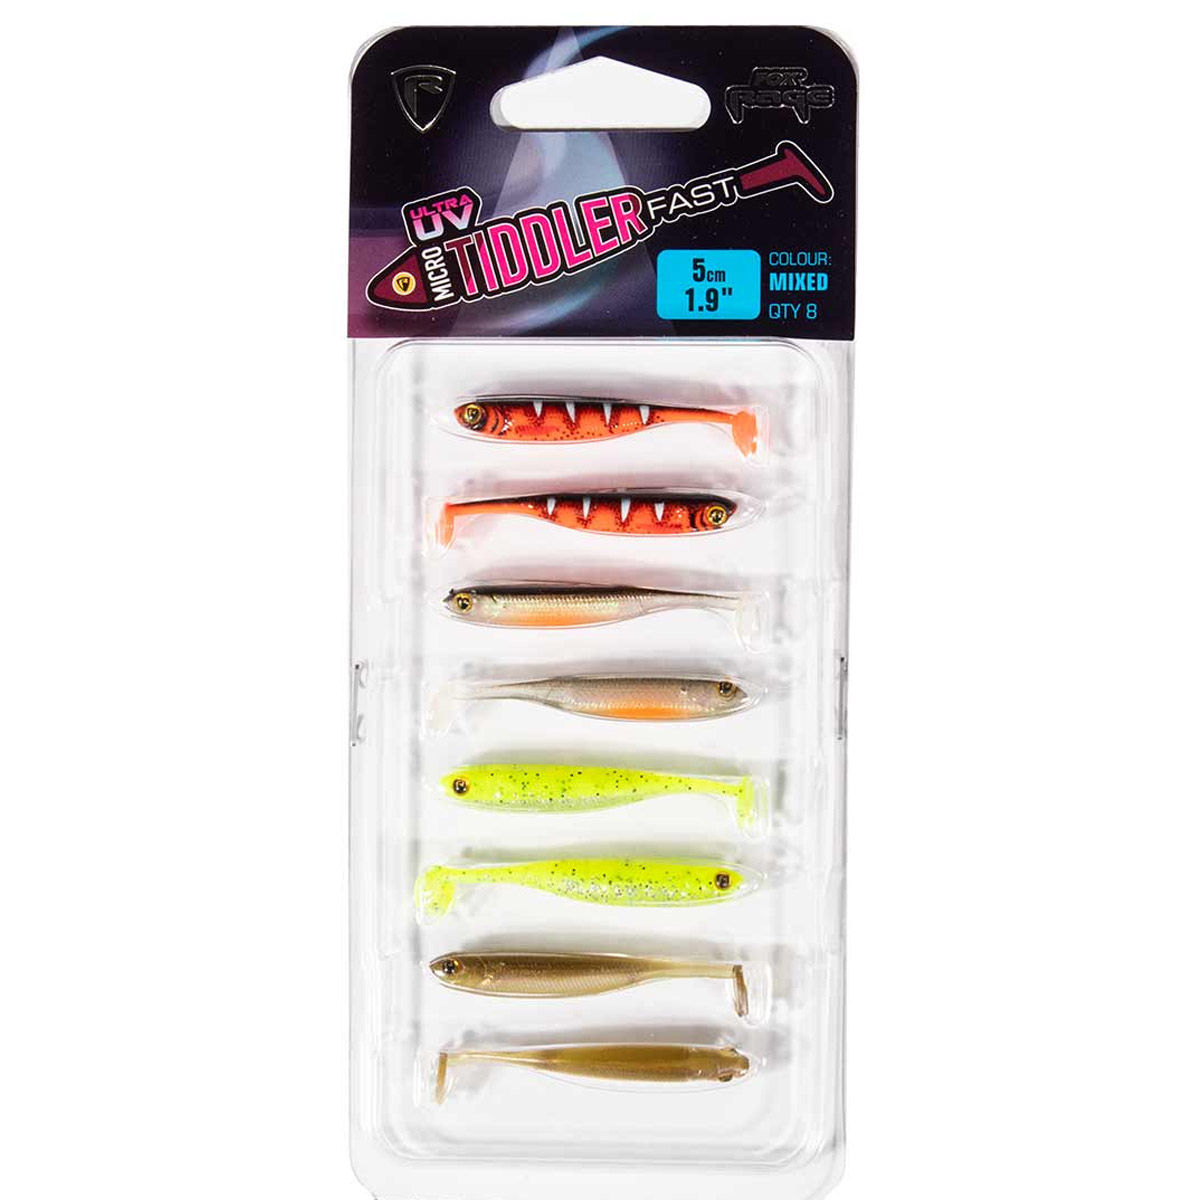 Fox Rage Micro Tiddler Fast 5cm Mixed Colour Pack